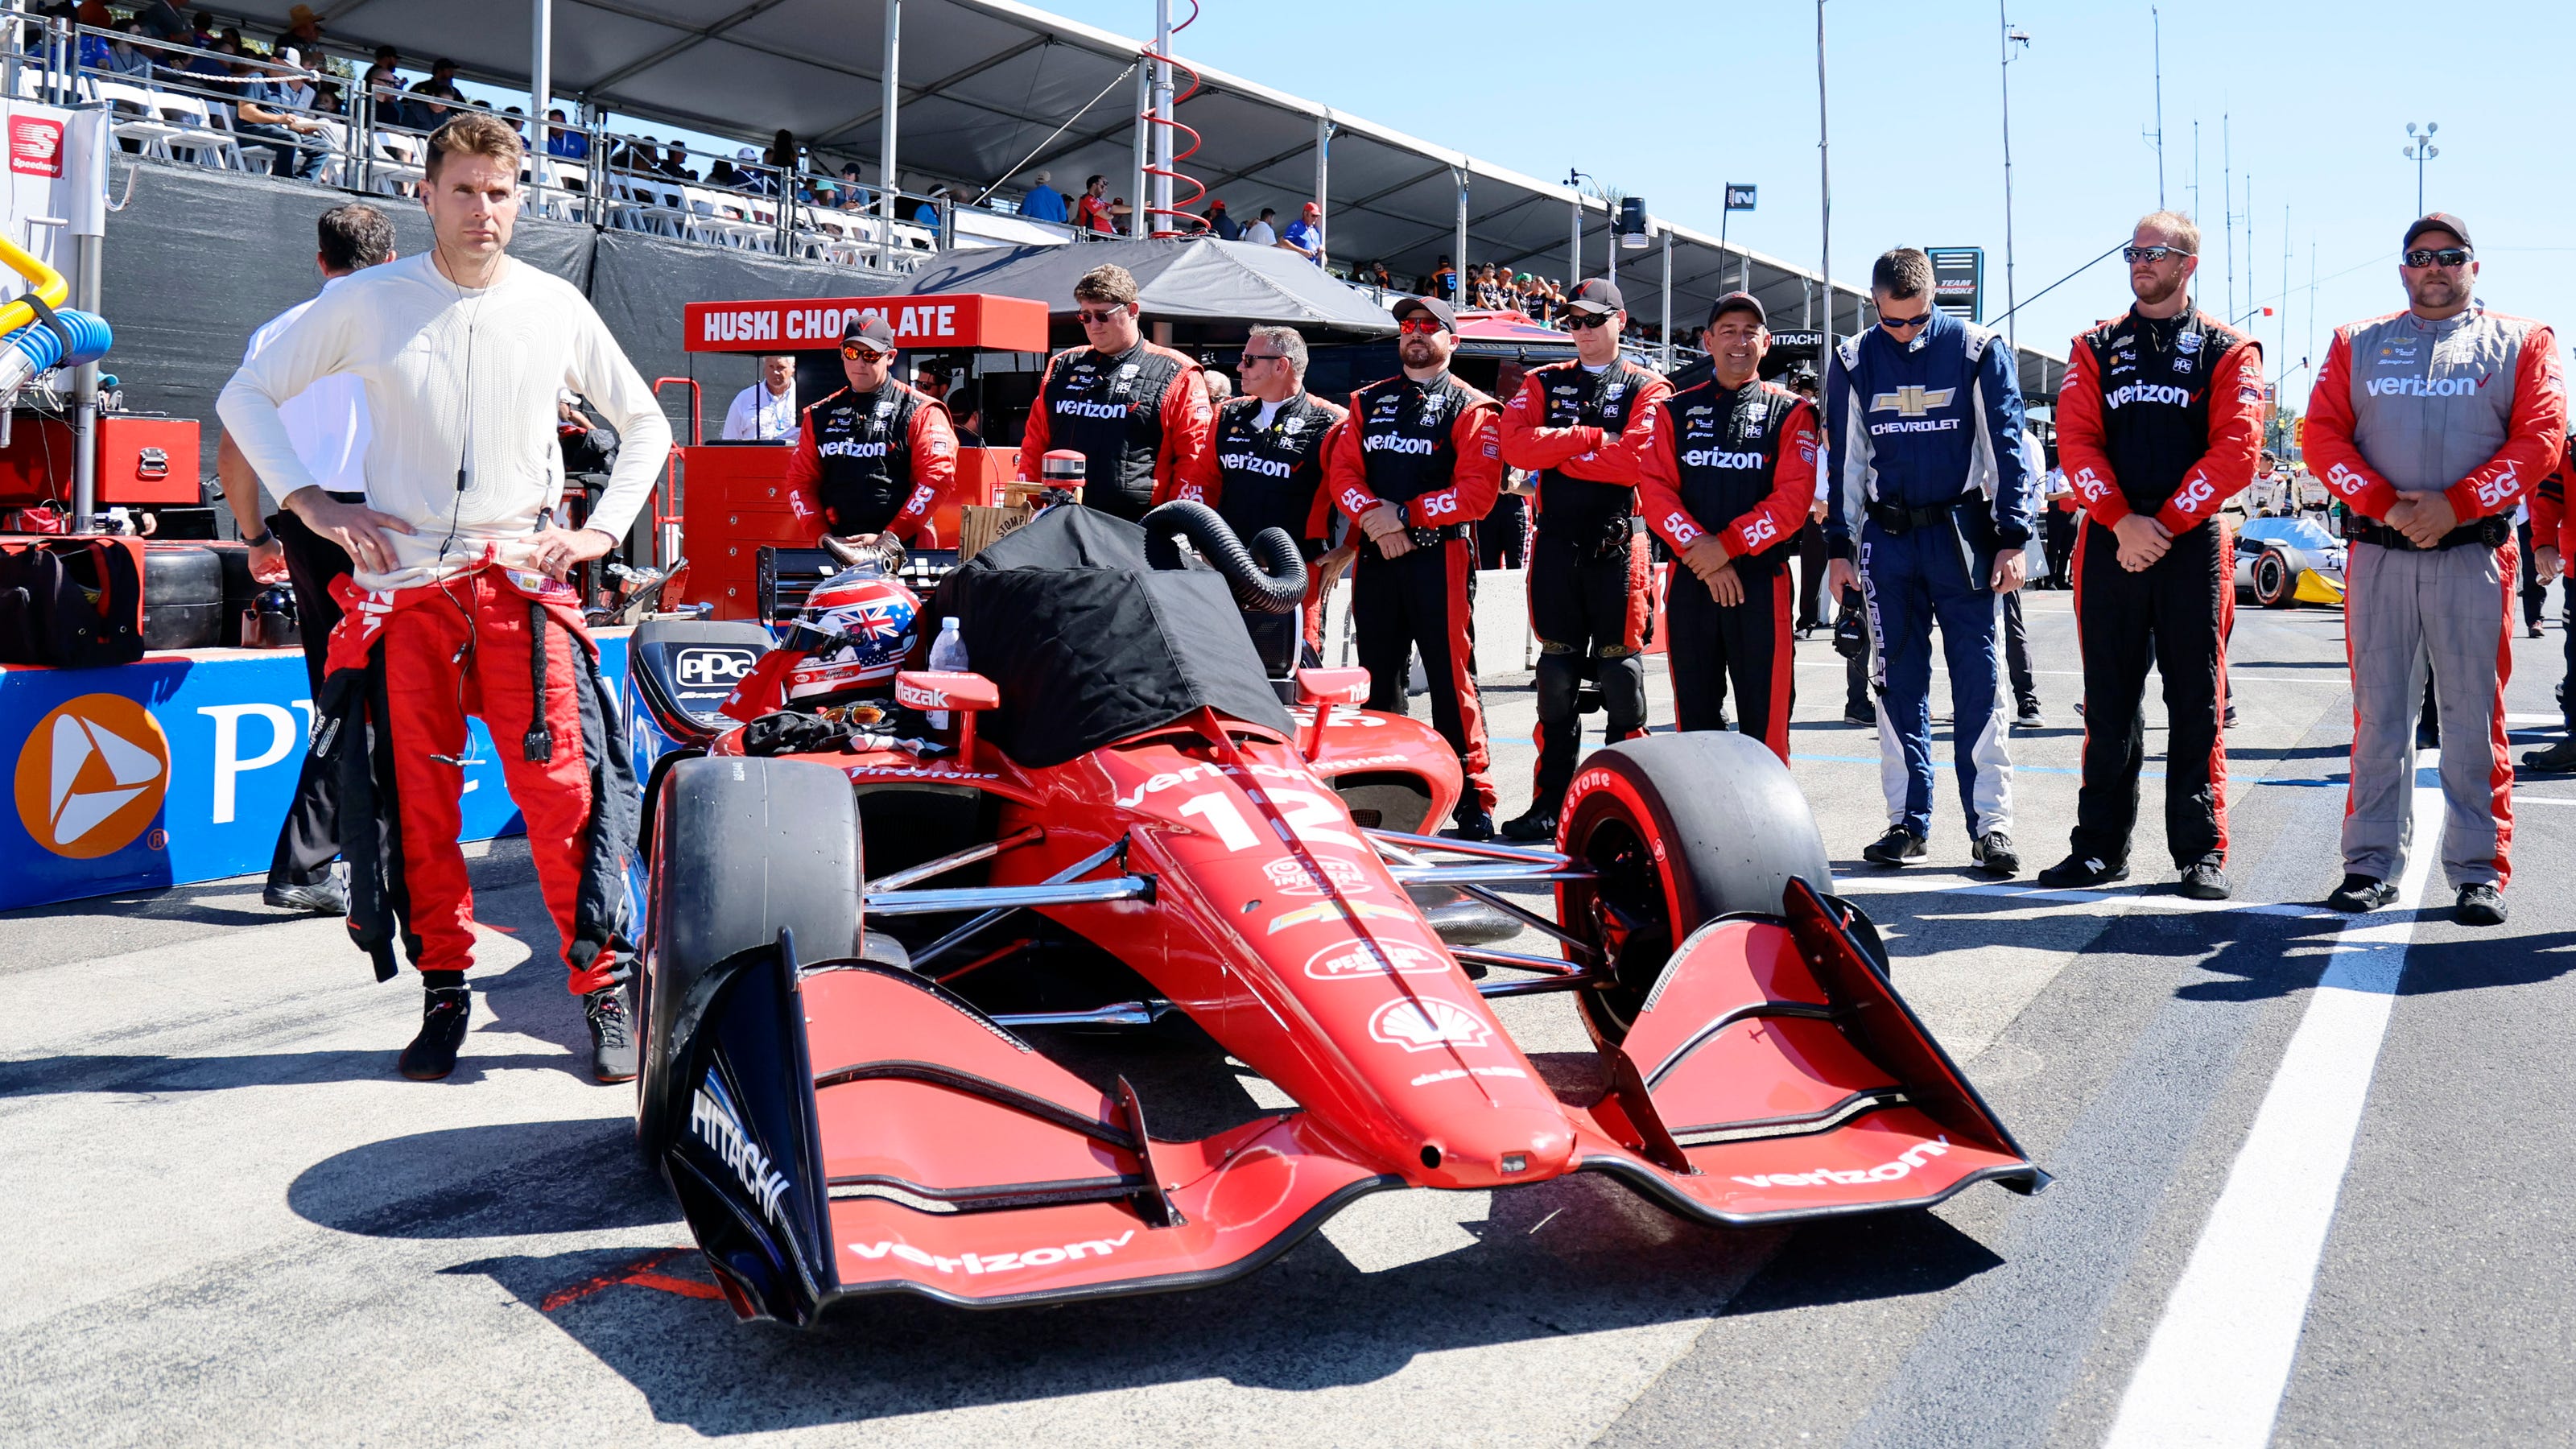  Full schedule: IndyCar announces start times and TV networks for 2023 season 